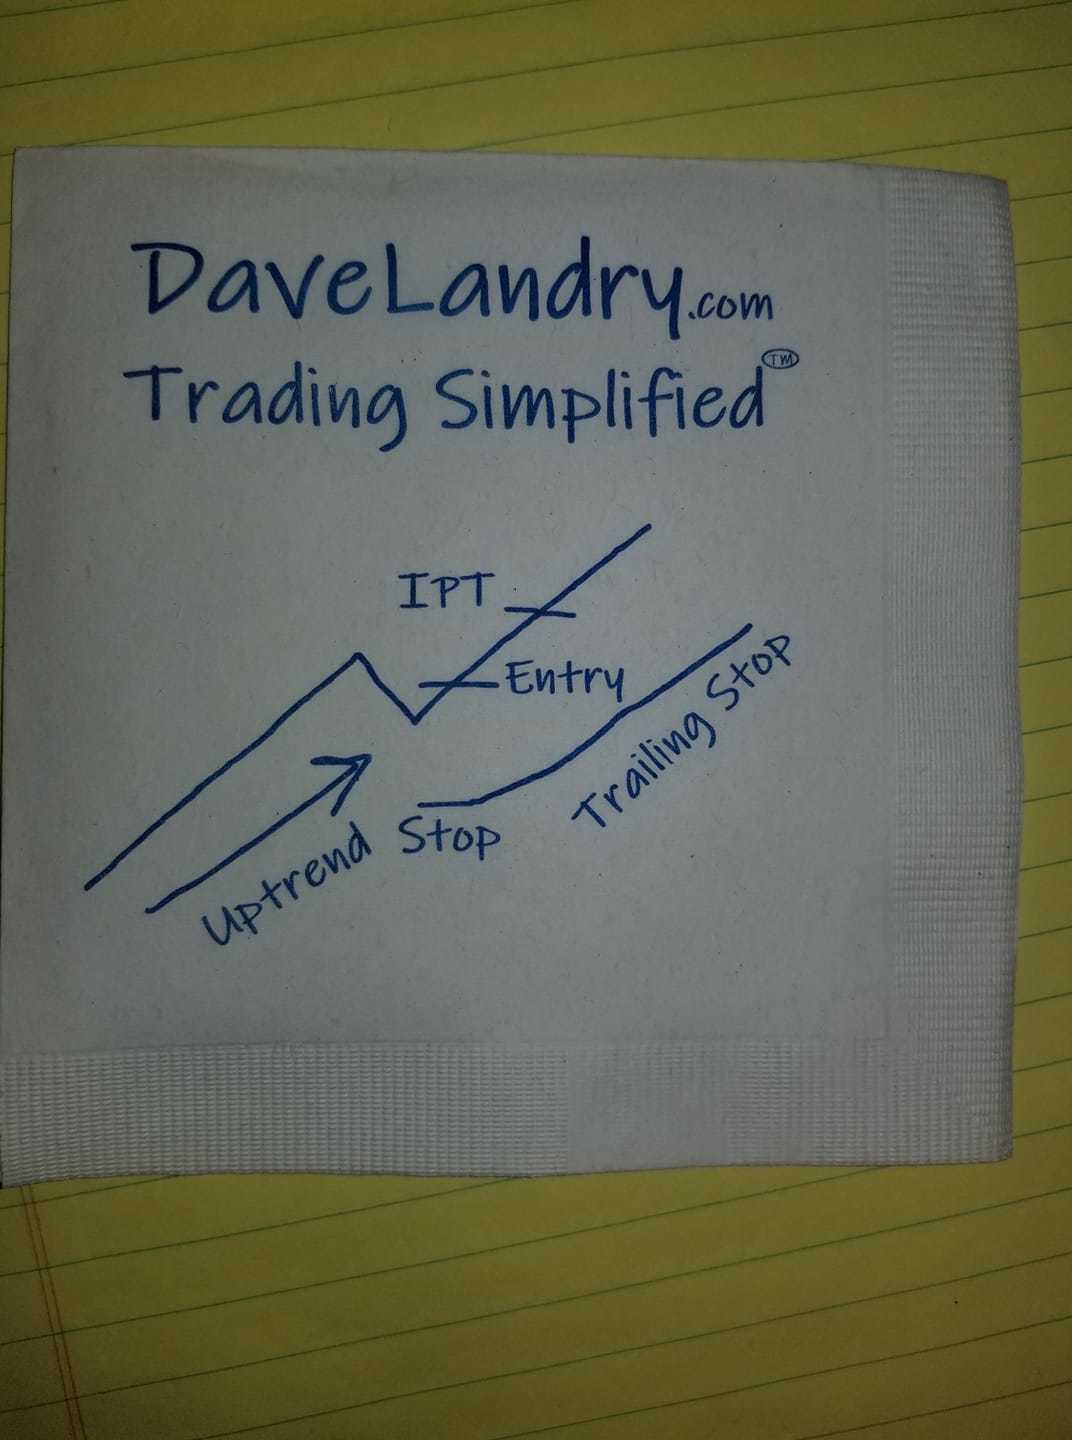 Dave Landry's Trading System On A Cocktail Napkin